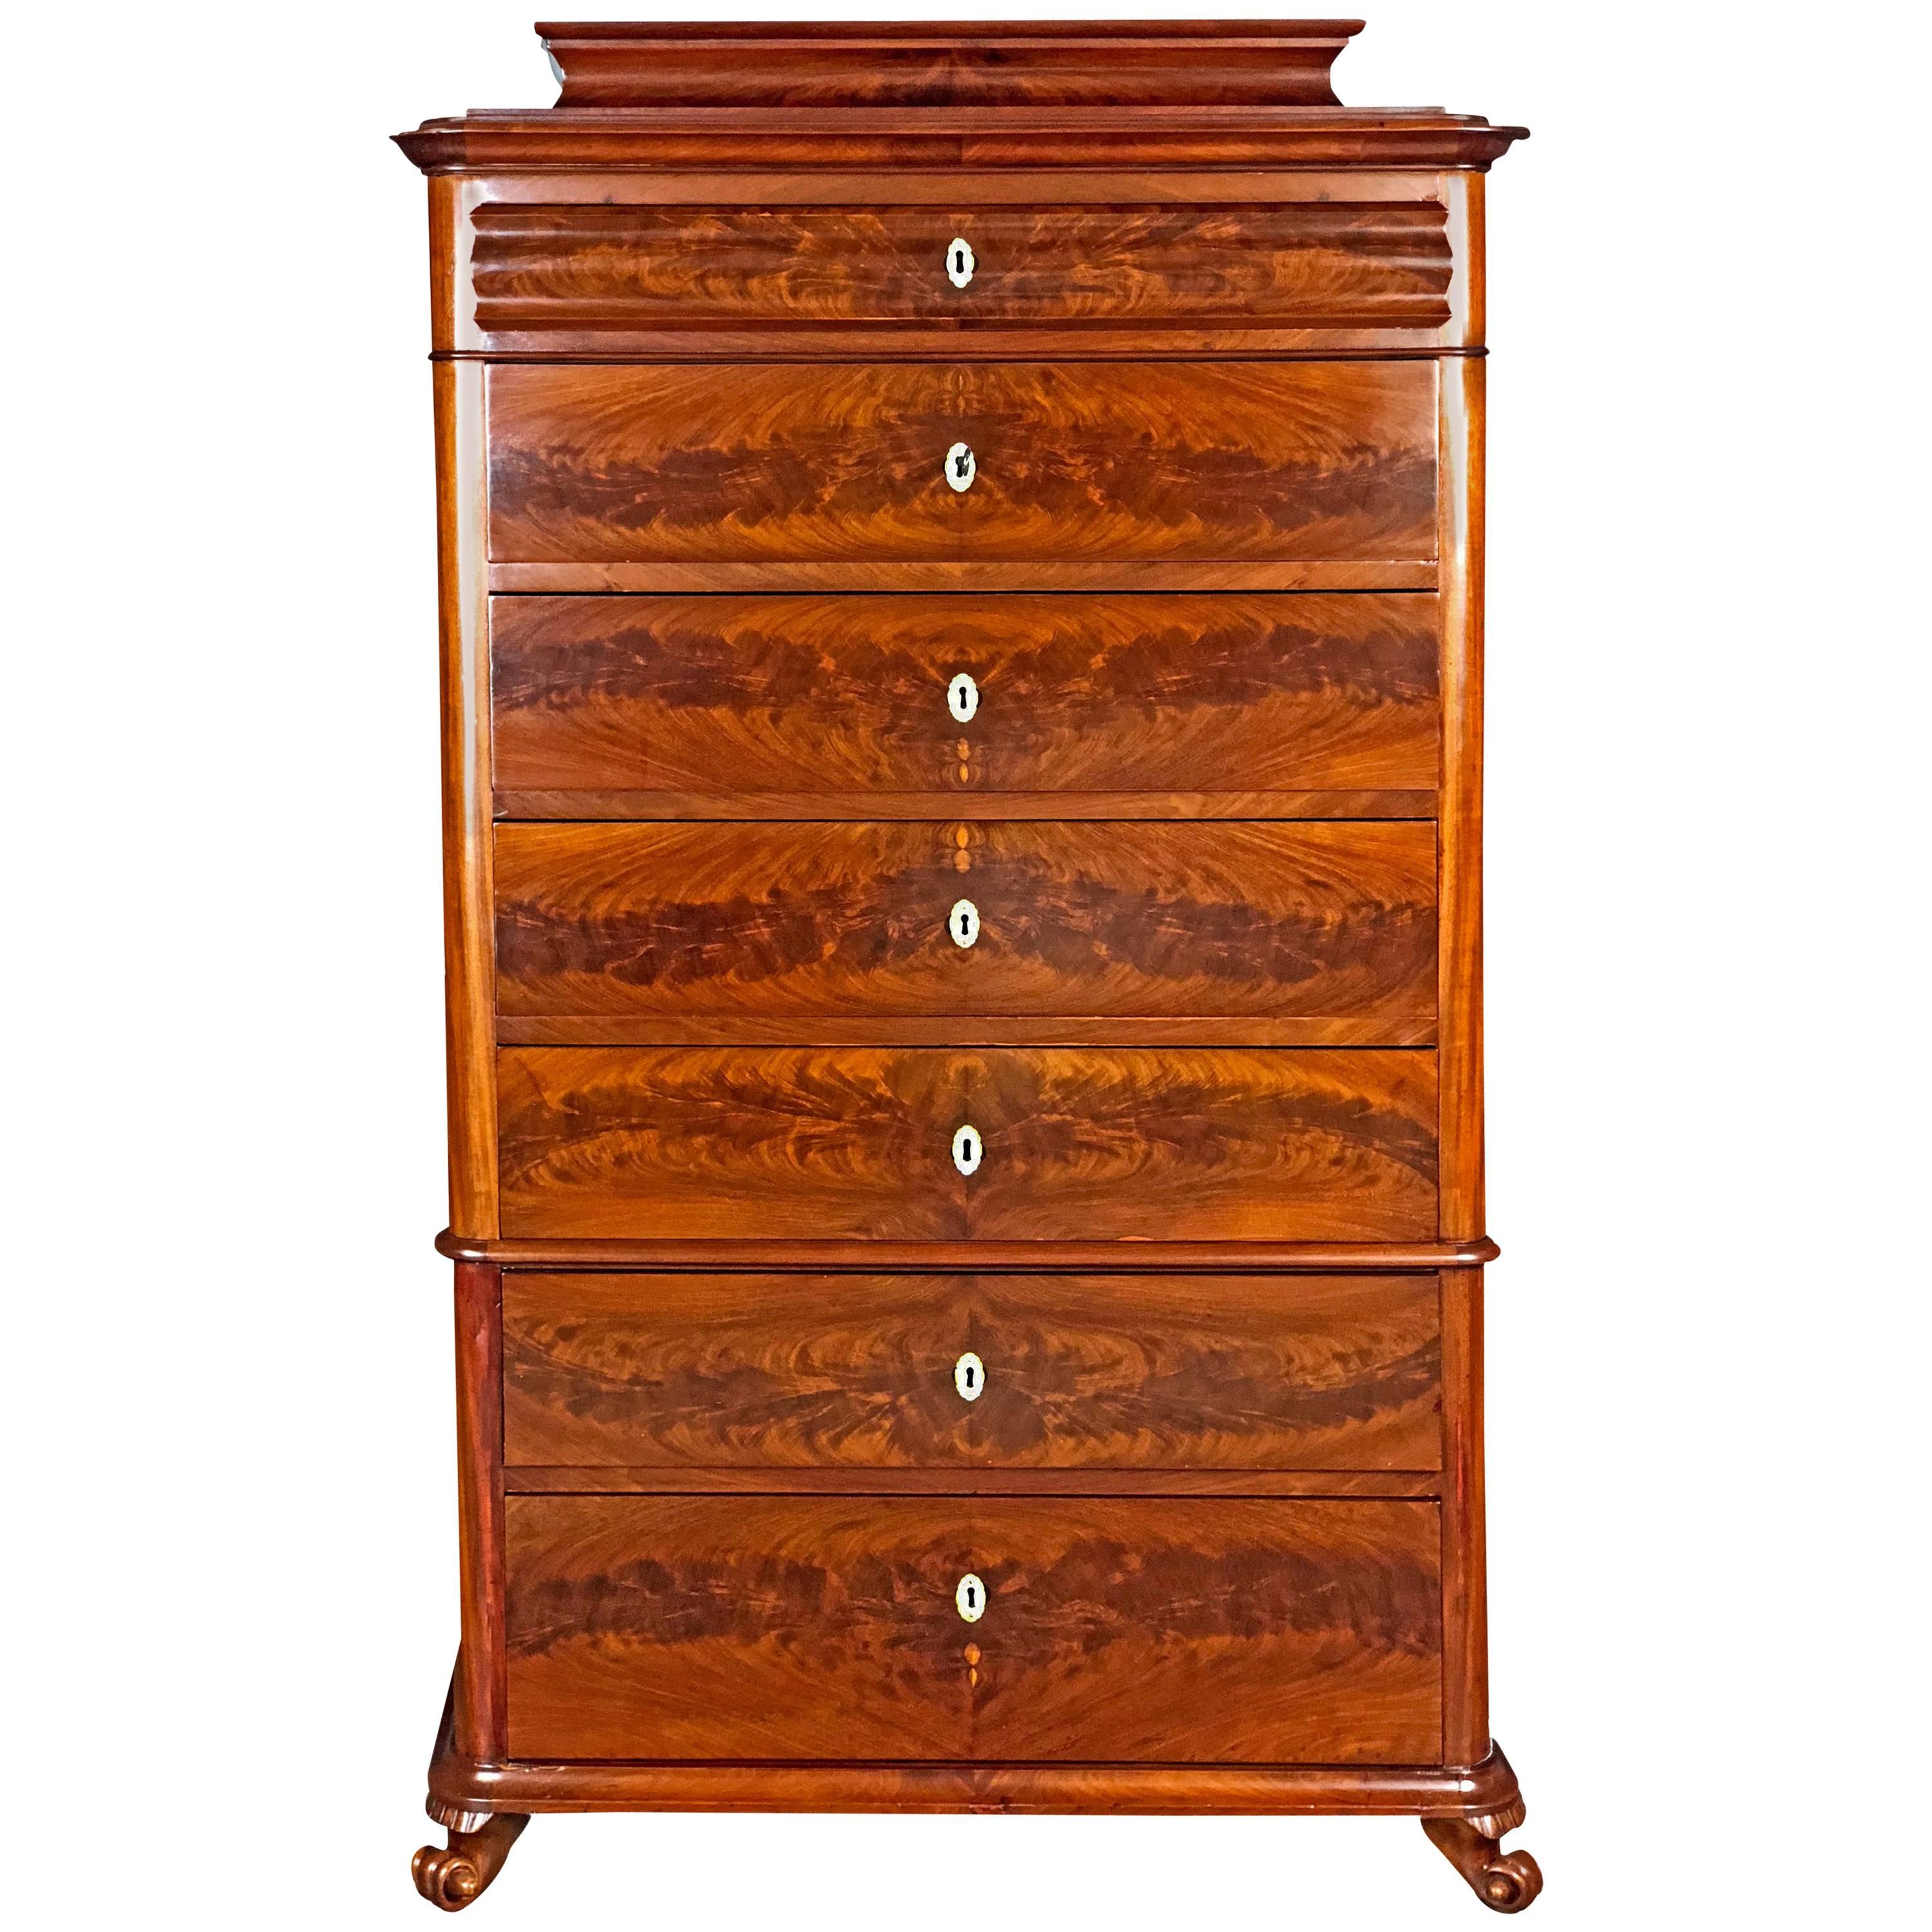 Danish Mid 19th Century Biedermeier Commode Tall Chest of drawers For Sale